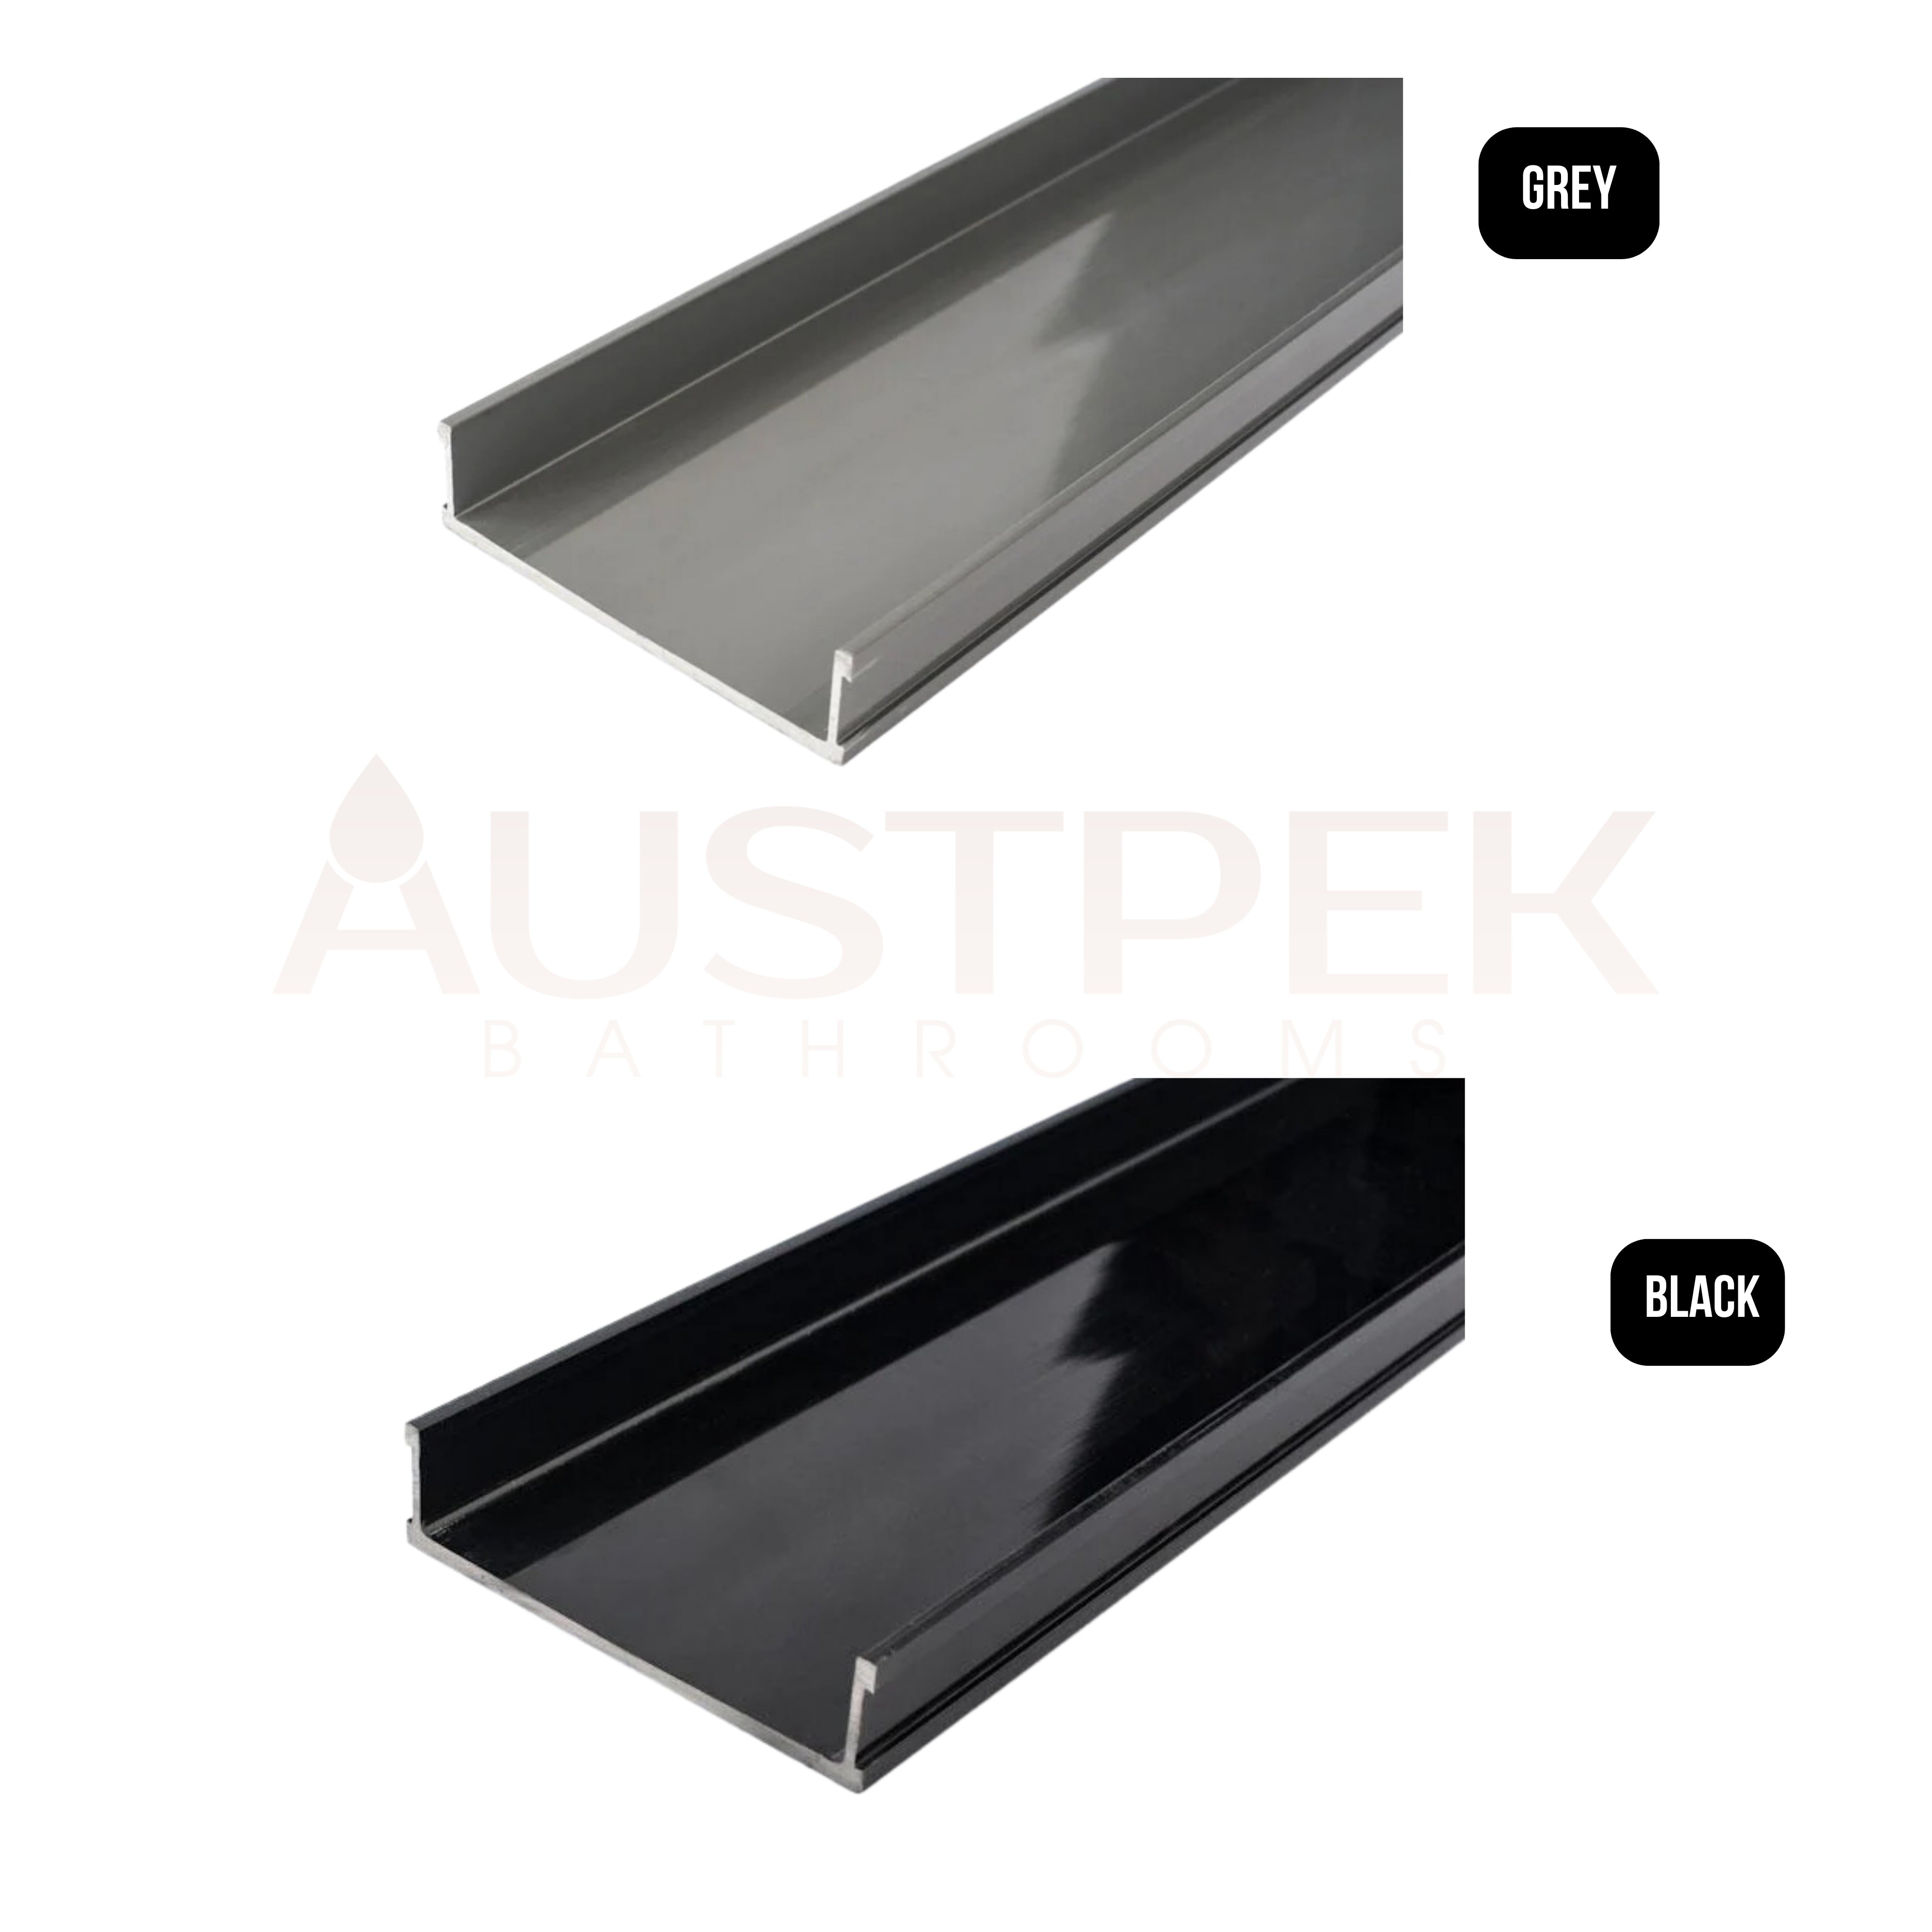 GRATES2GO UPVC MODULAR BASE CHANNEL GREY 1000MM, 1250MM, 1500MM, 2000MM AND 3000MM